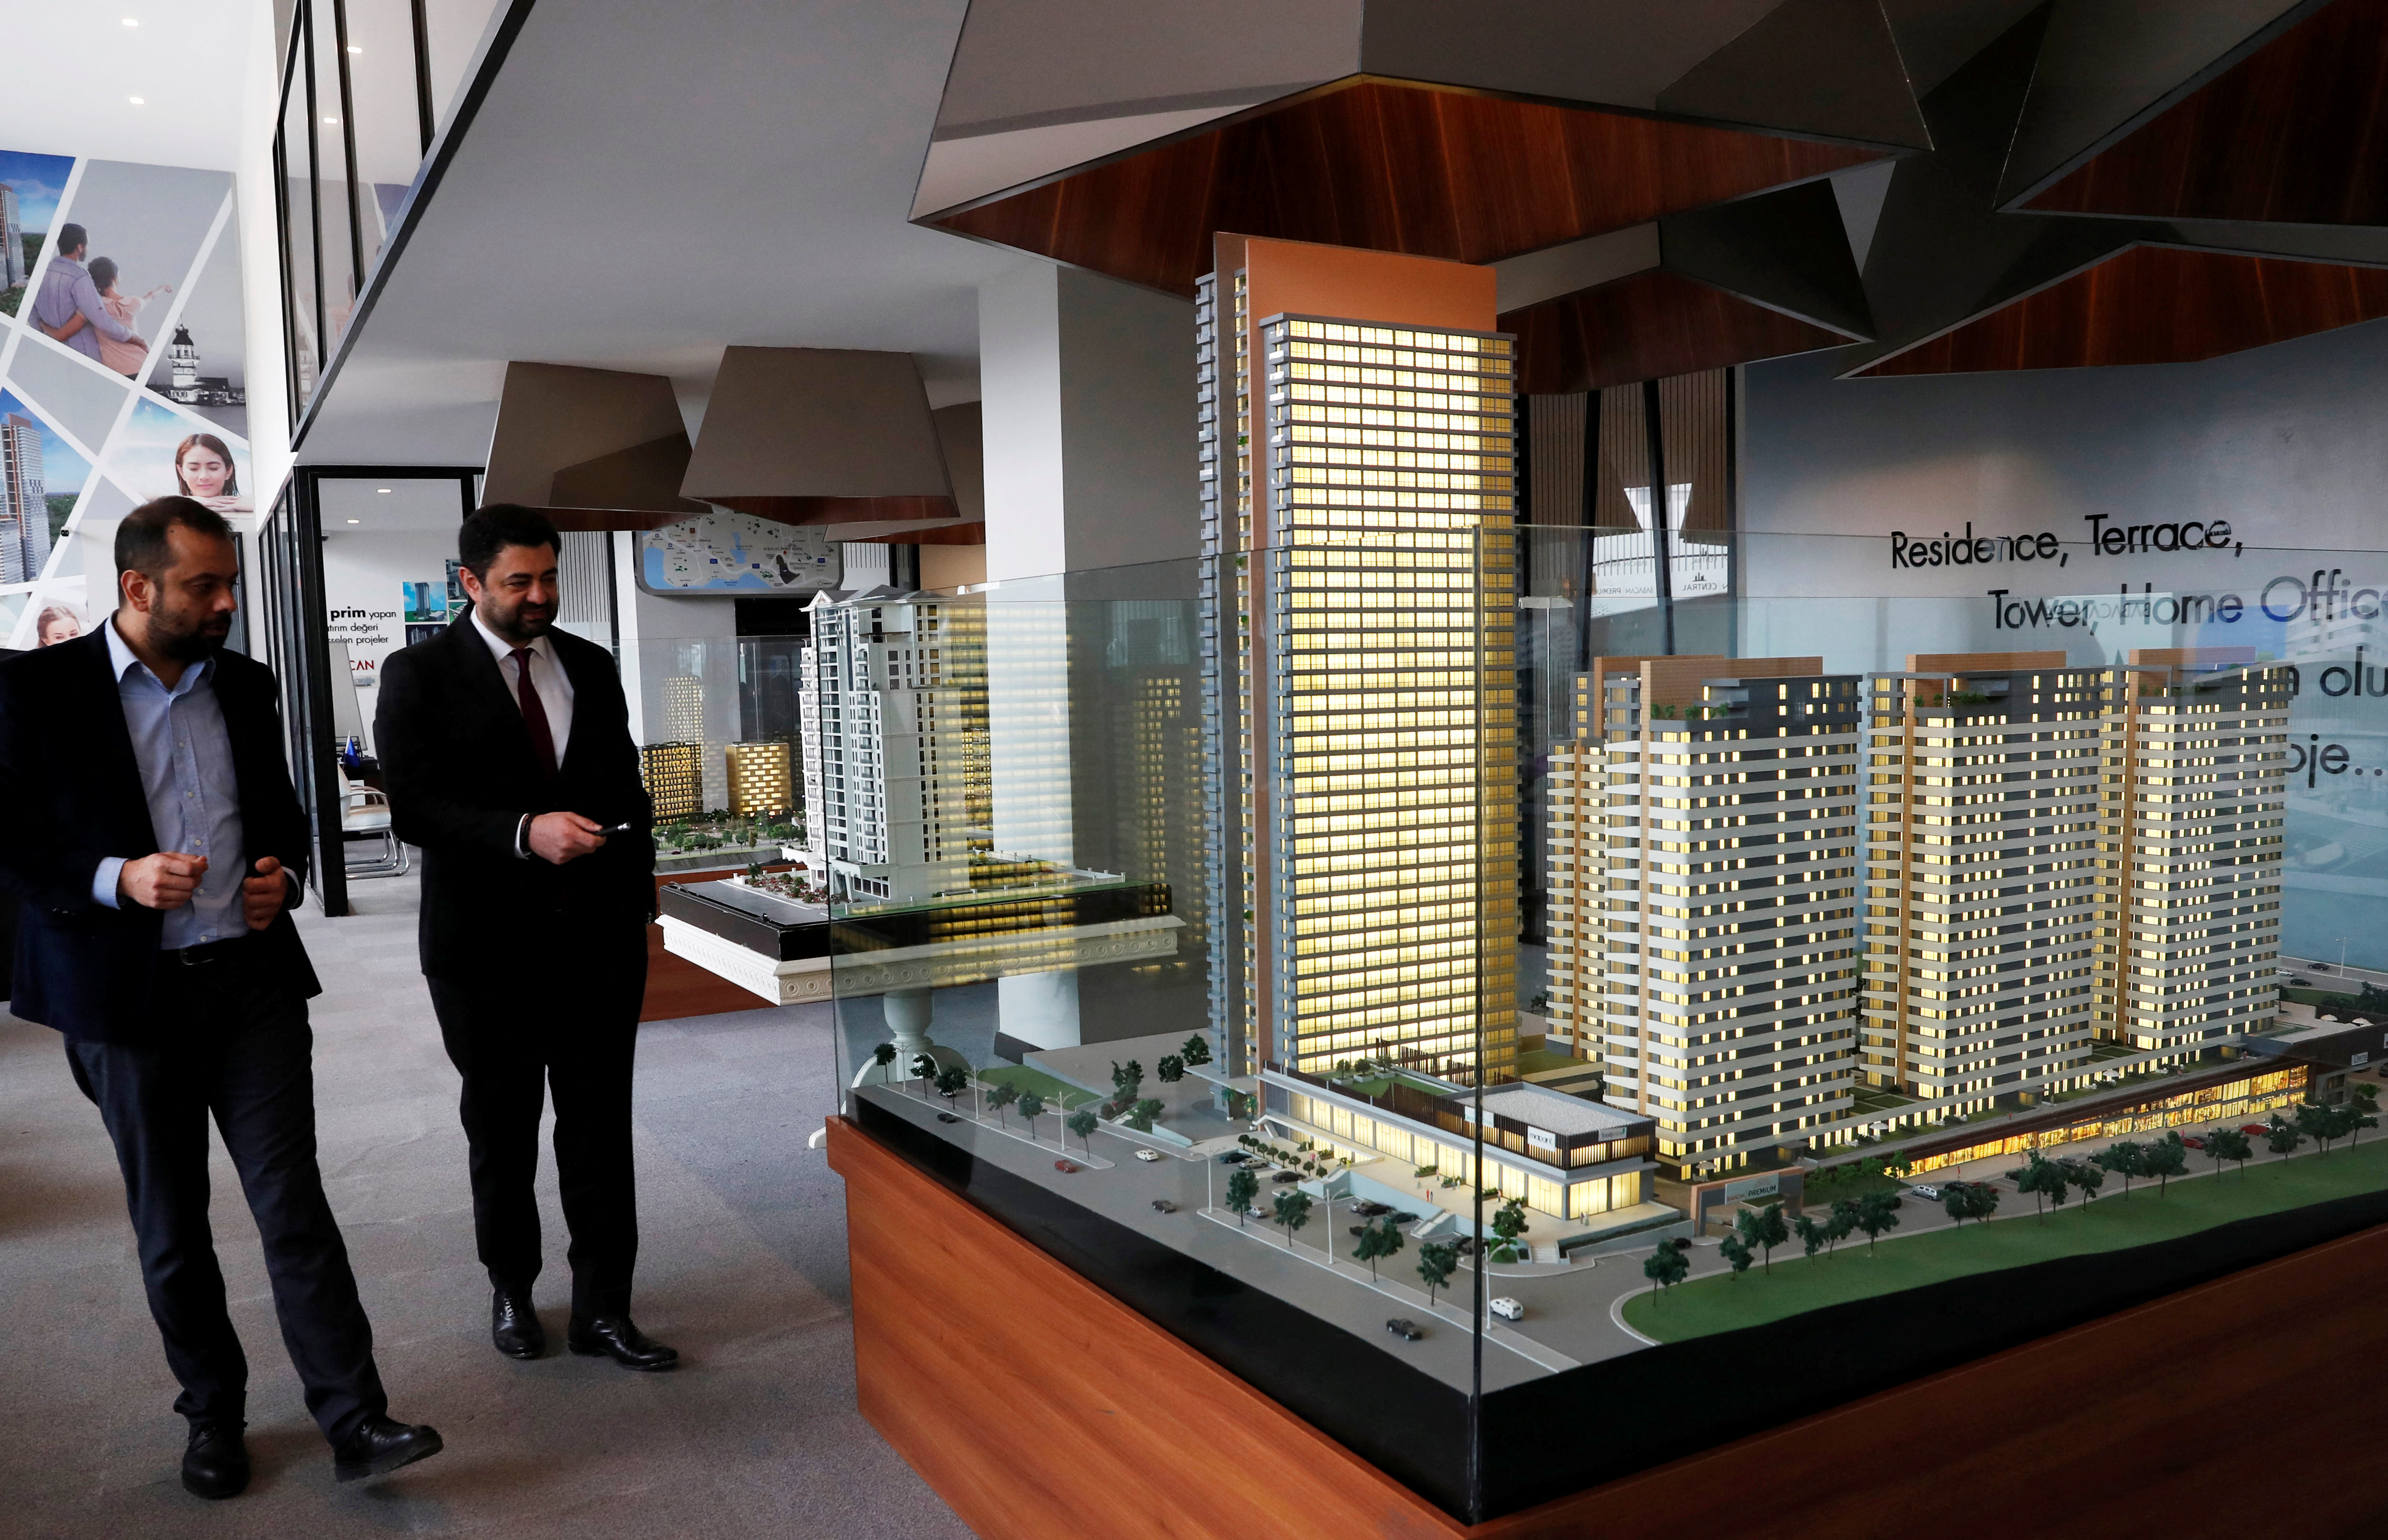 Ibrahim Babacan, Chairman of the Turkish real estate and construction company Babacan Holding, is seen at the sales office of Babacan Premium in Istanbul, Turkey, March 21, 2019. REUTERS/Murad Sezer